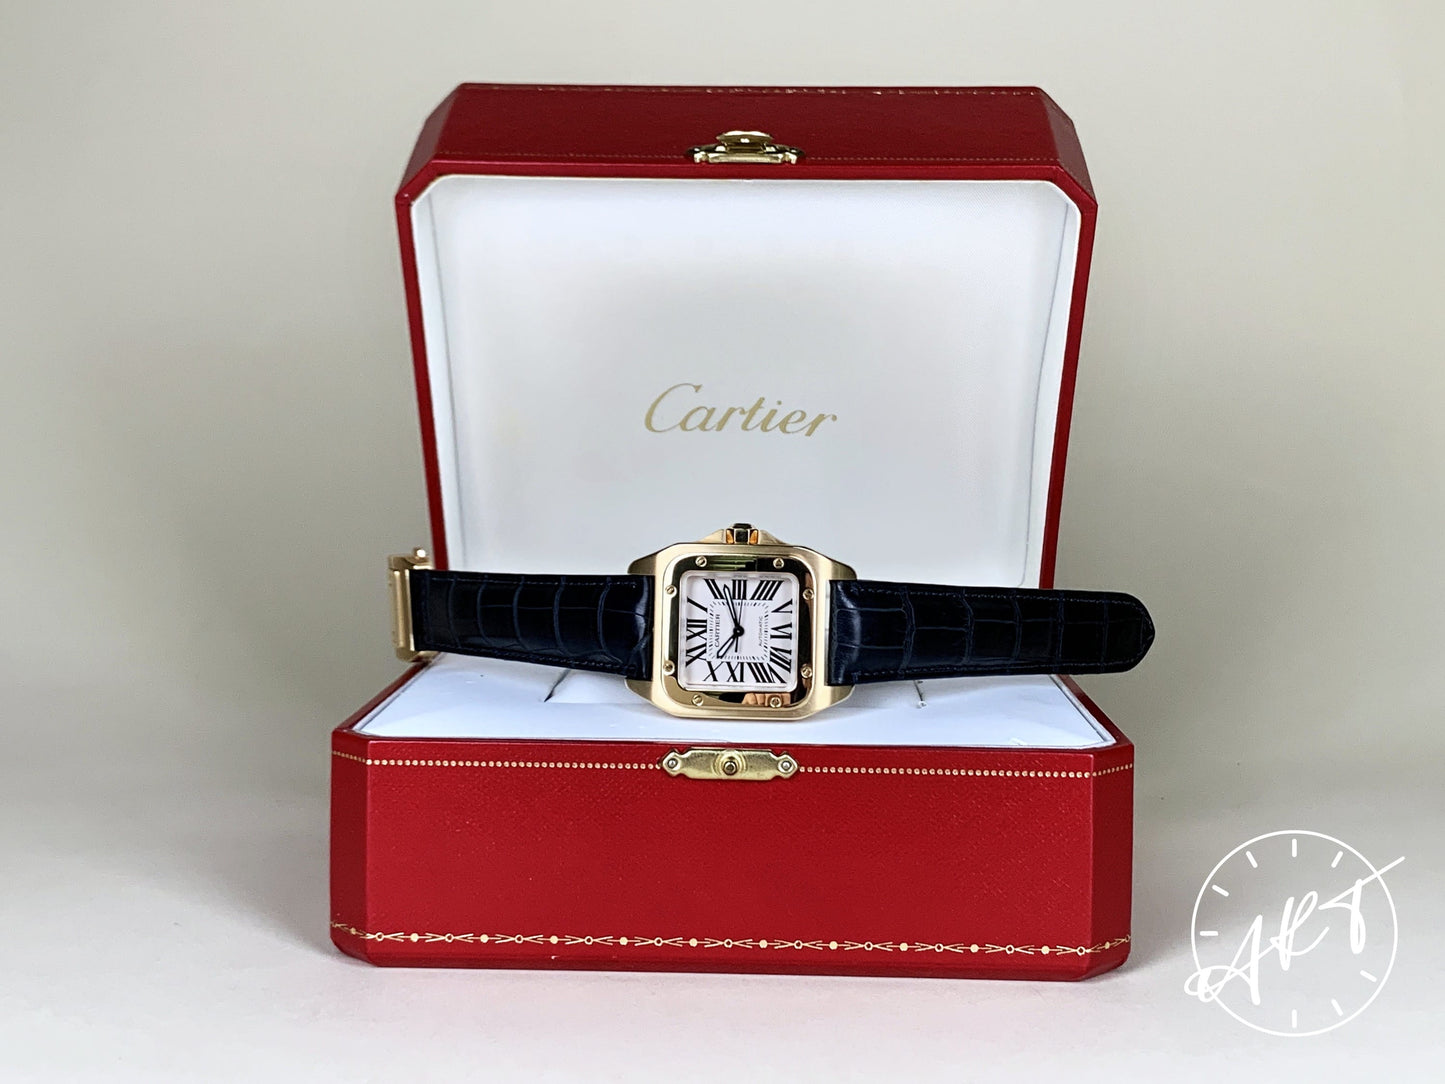 Cartier Santos 100 White Dial 18K Rose Gold Automatic Watch 2880 w/ Box